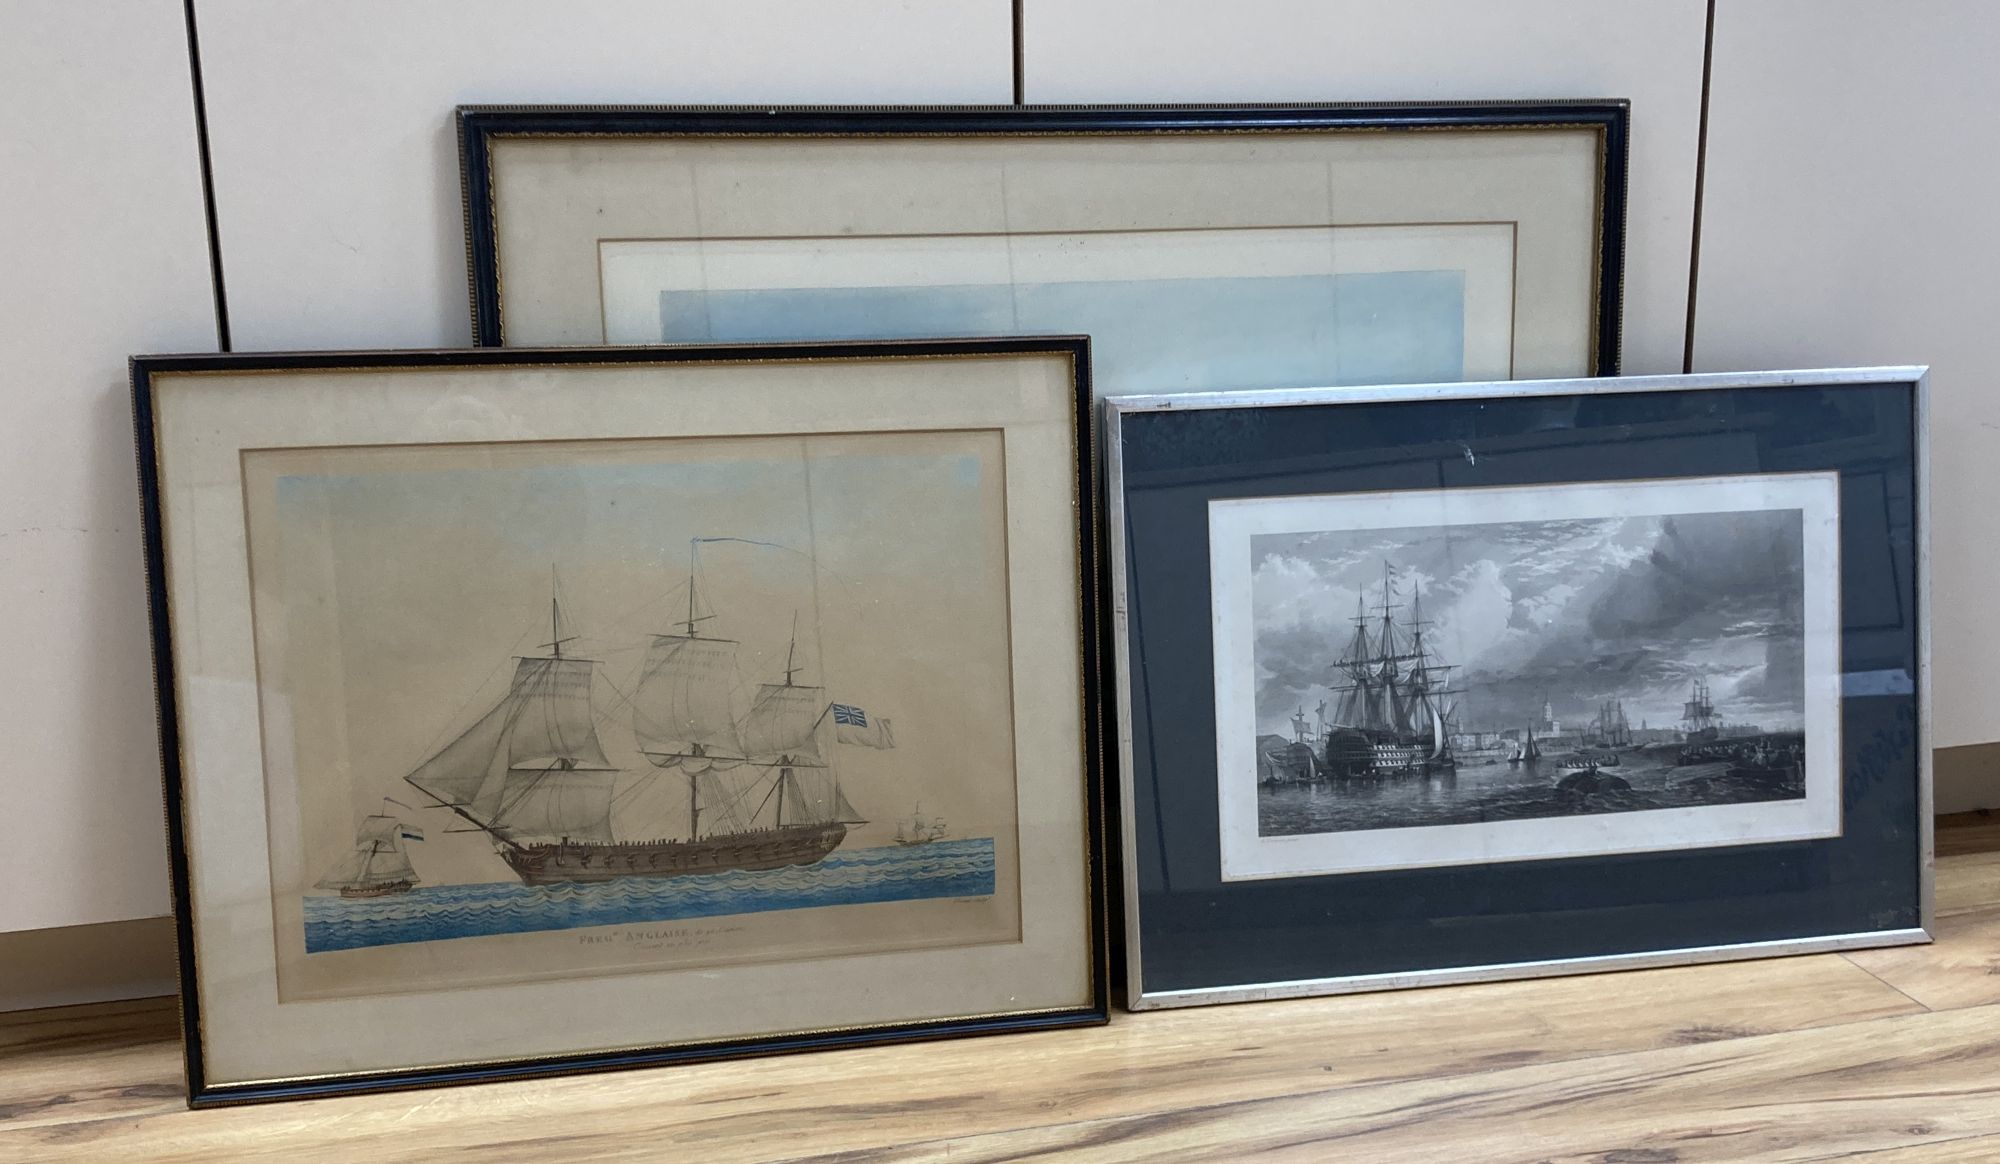 Rosenberg after Huggins, coloured aquatint, Lord Yarboroughs' yacht 'The Falcon', 43 x 62cm, an engraving of Greenwich after Duncan and a French colour print of an English frigate